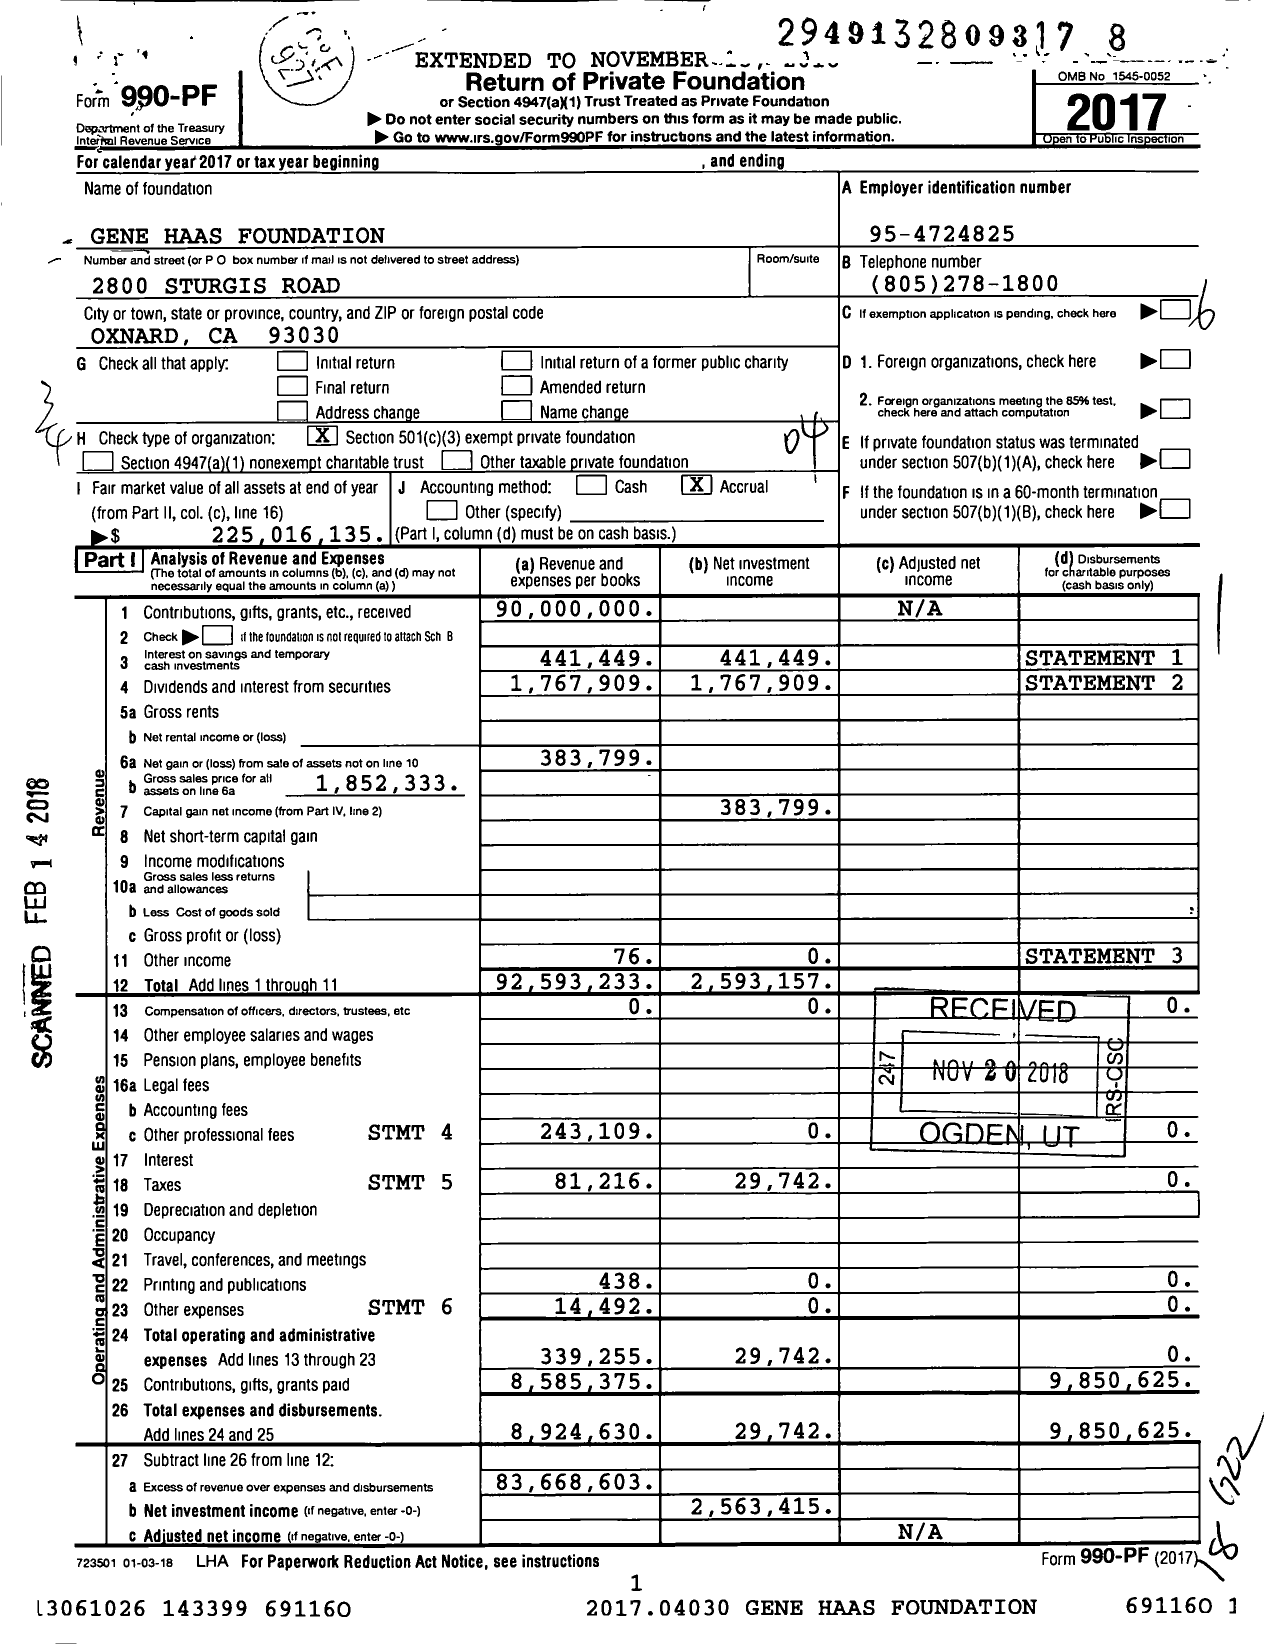 Image of first page of 2017 Form 990PF for Gene Haas Foundation